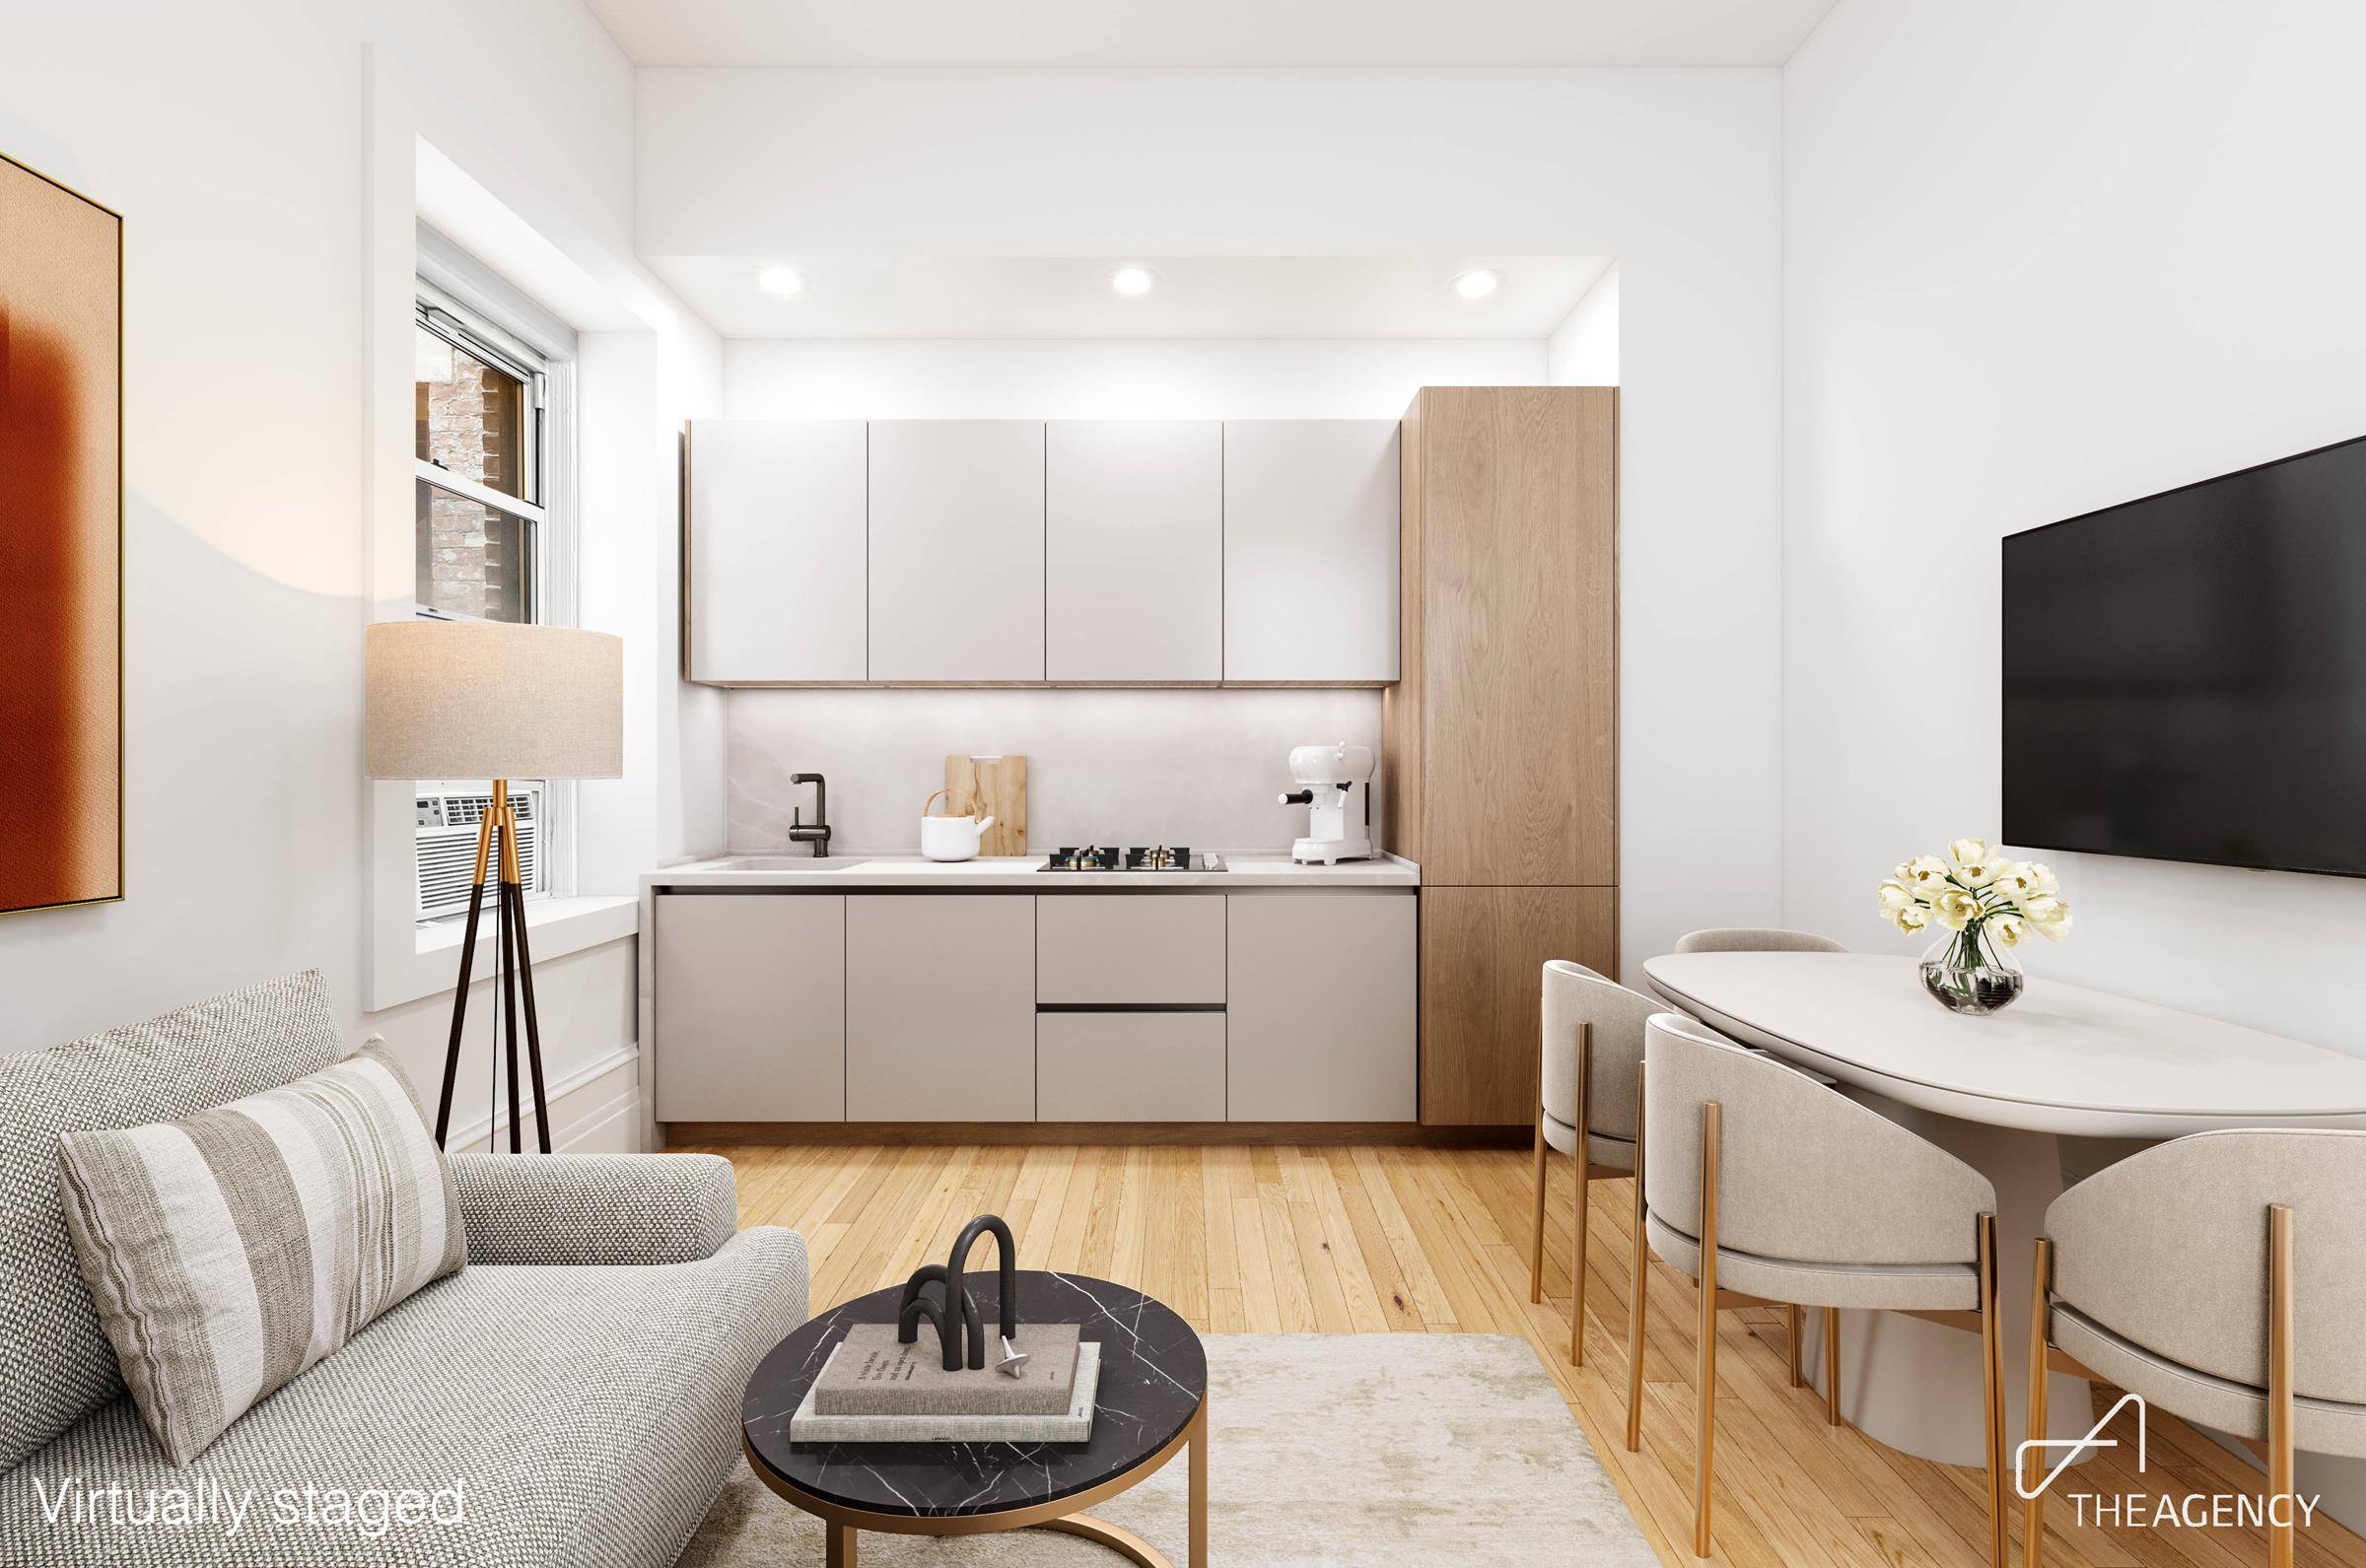 Welcome to Apartment 2SE, a rare gem nestled in the prestigious Beaux Arts building on the Gold Coast of Greenwich Village.